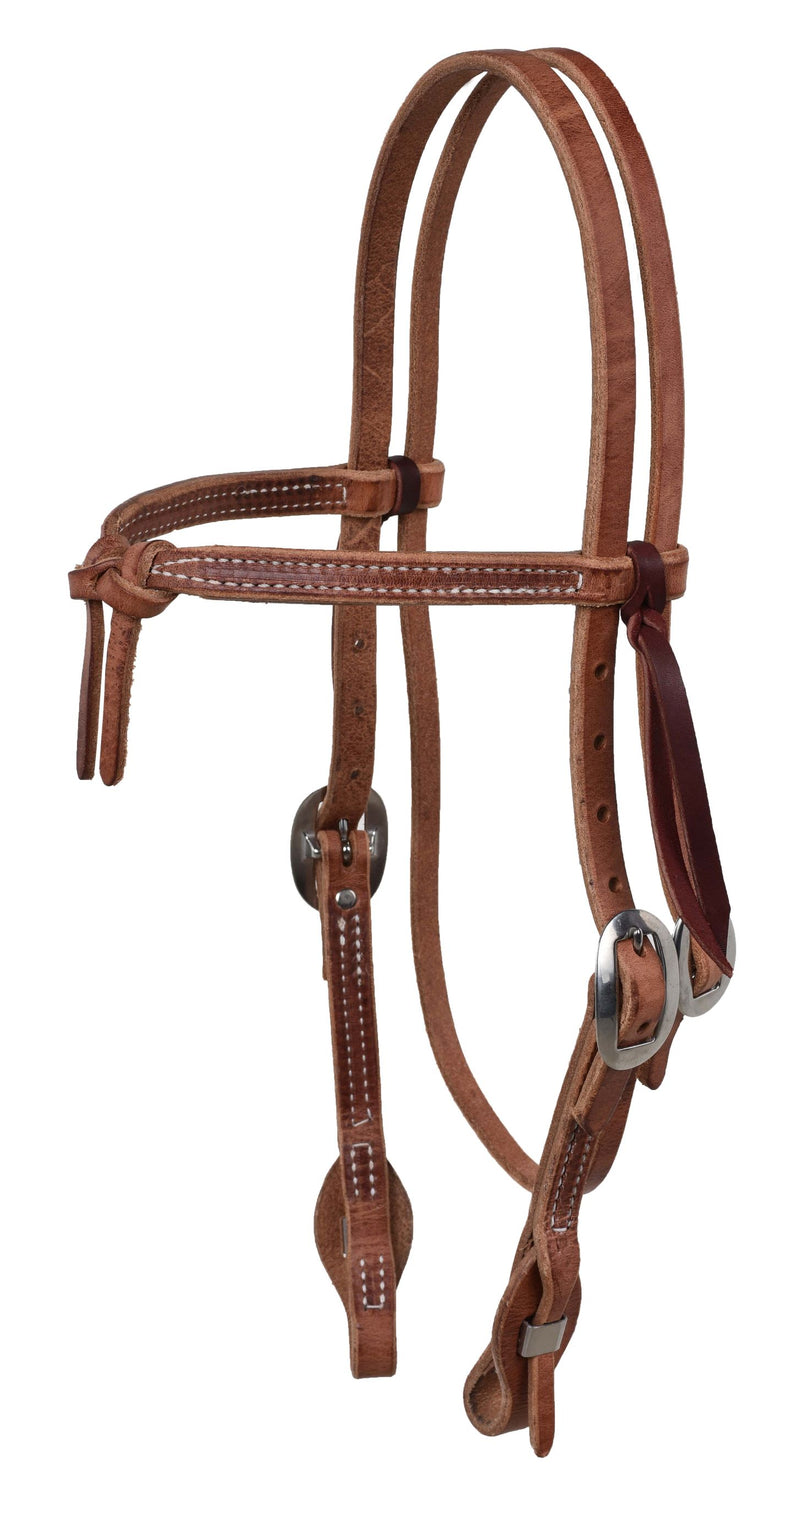 Quick Change Knotted Browband Headstall